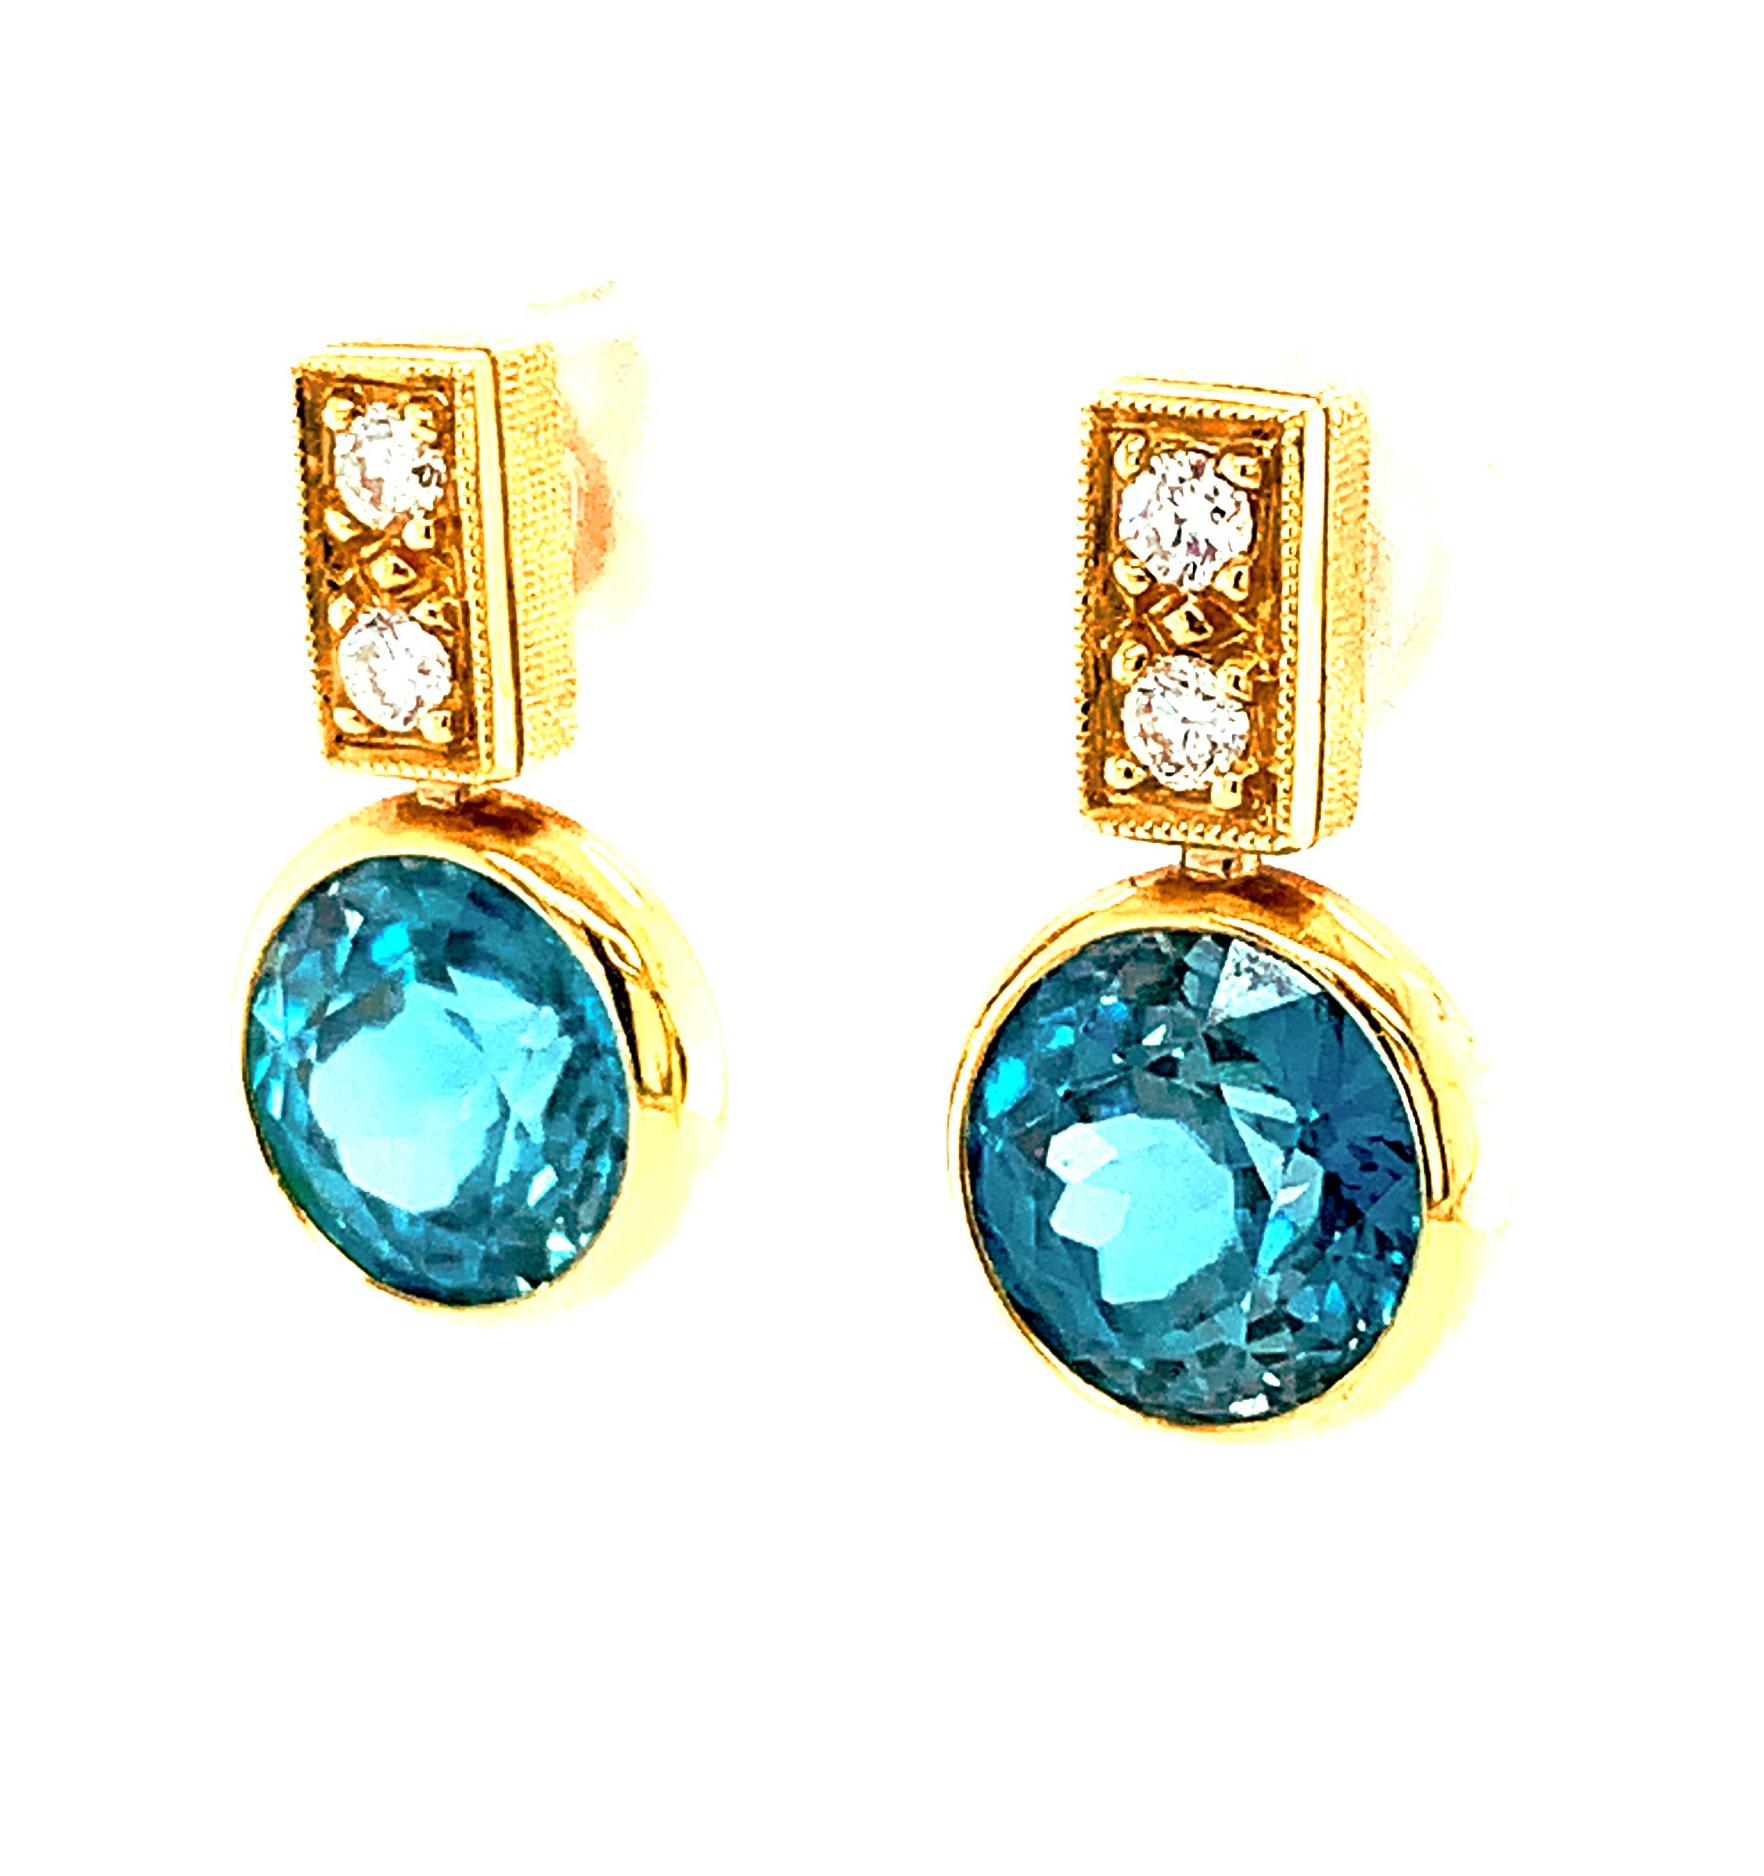 Blue Zircon and Diamond Drop Earrings in 18K Yellow Gold, 9.64 Carats Total In New Condition For Sale In Los Angeles, CA